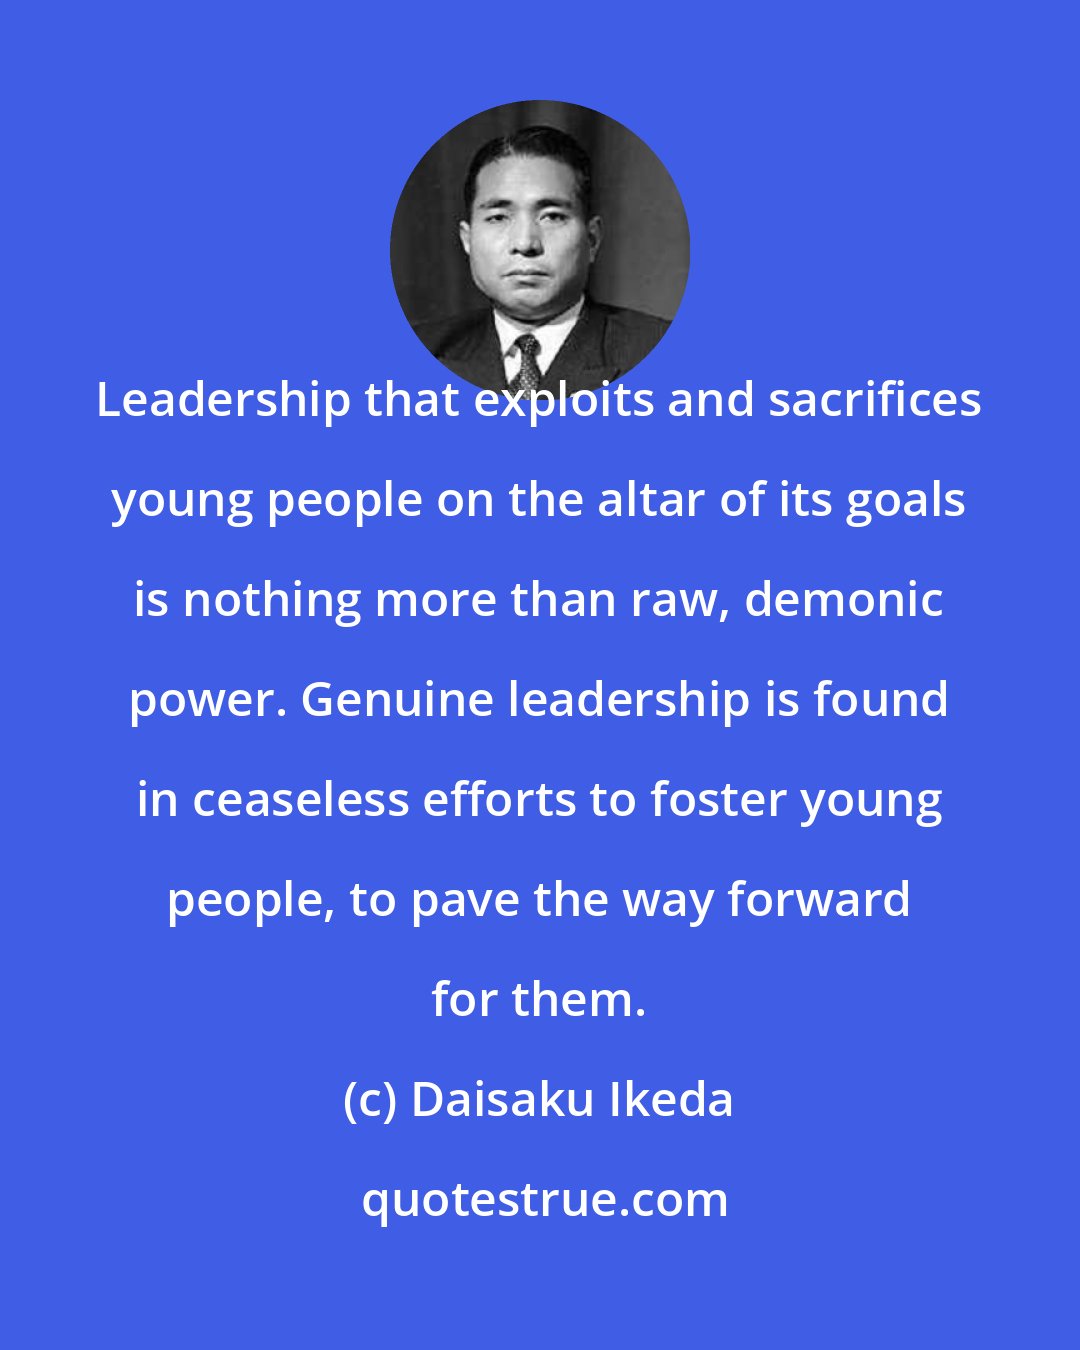 Daisaku Ikeda: Leadership that exploits and sacrifices young people on the altar of its goals is nothing more than raw, demonic power. Genuine leadership is found in ceaseless efforts to foster young people, to pave the way forward for them.